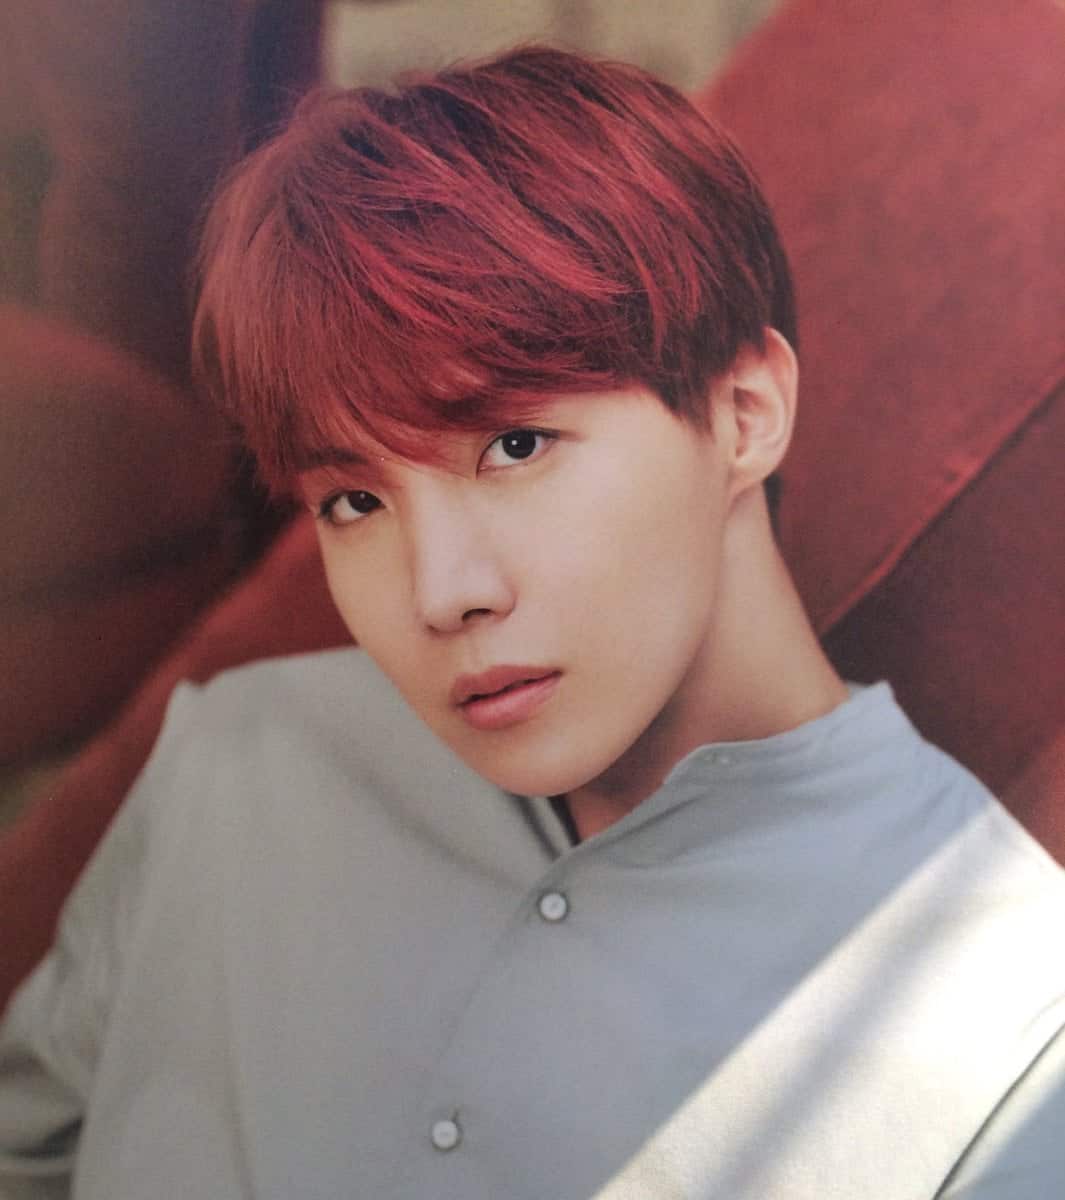 Jhope as 707 (Saeyoung Choi)